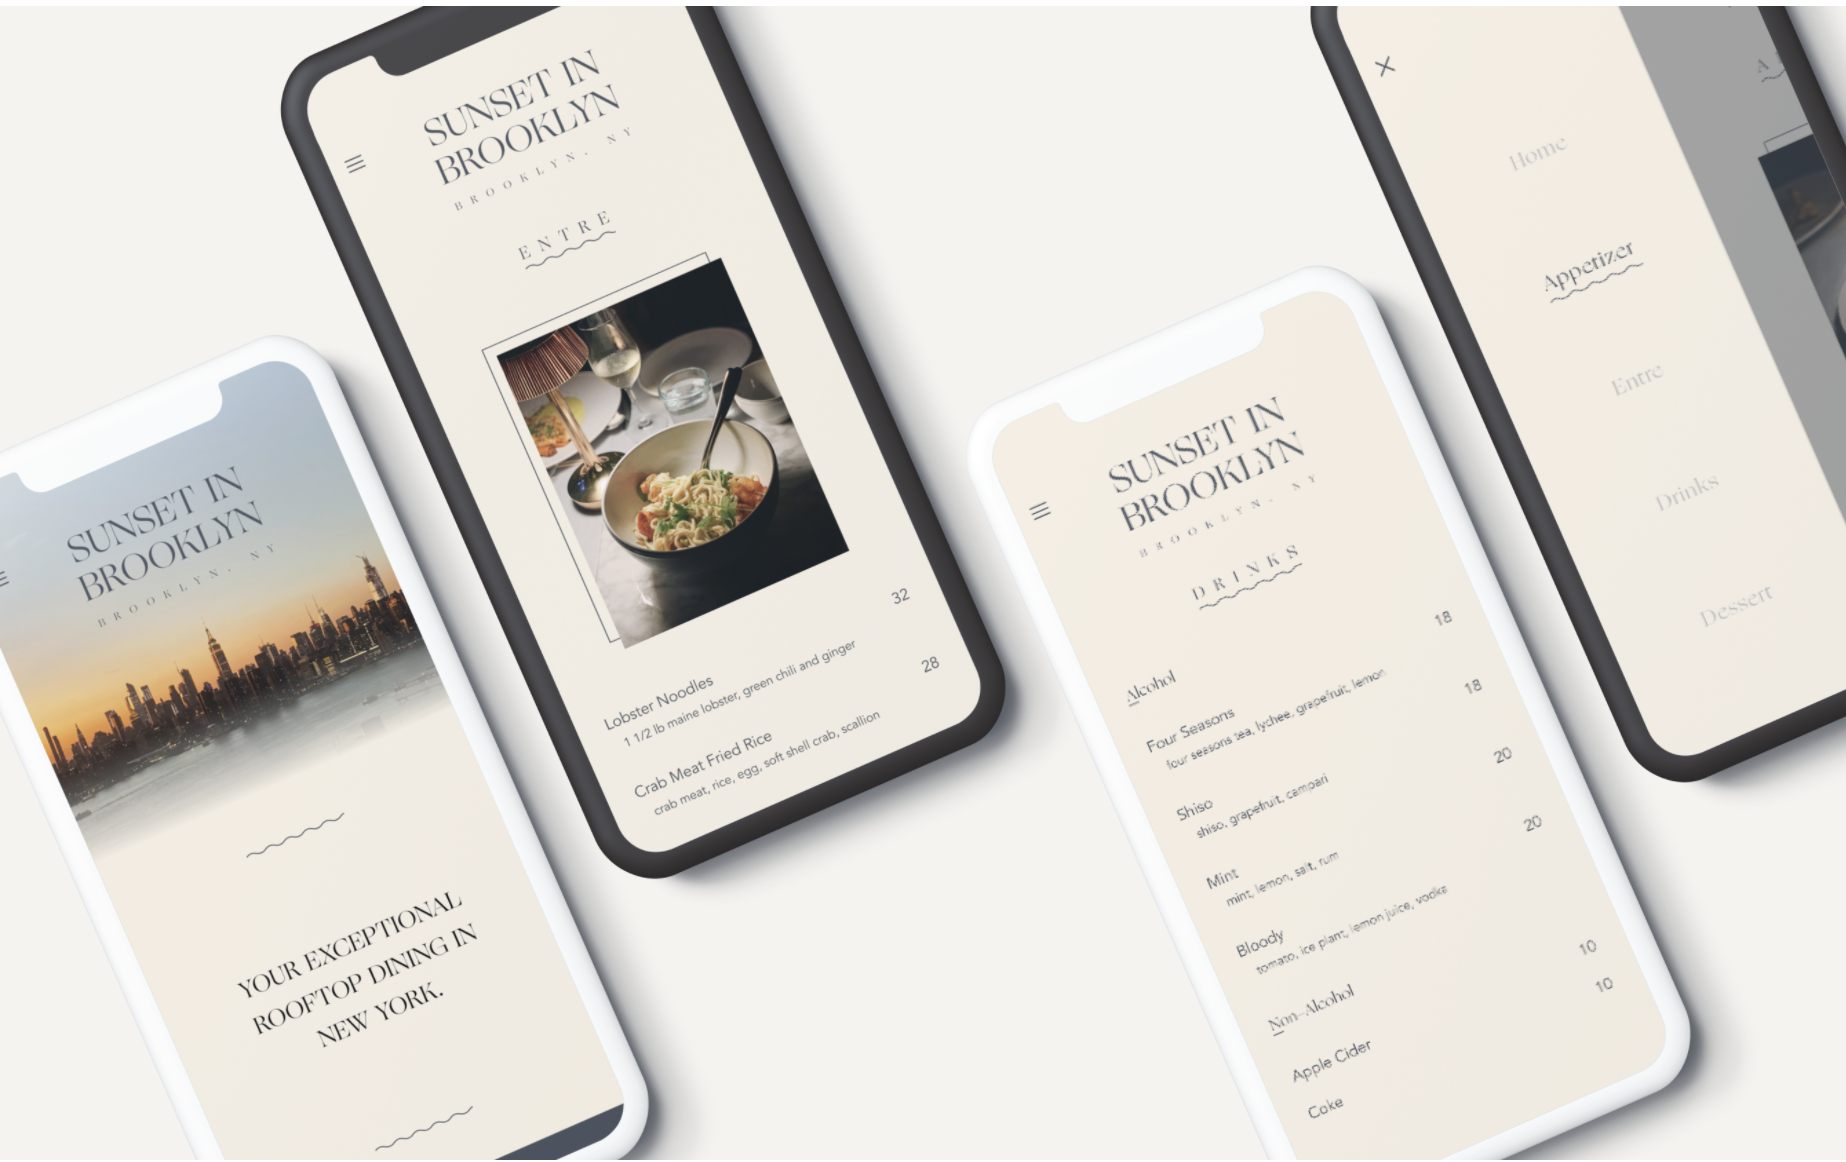 Mockup of a website and menu for Sunset in Brooklyn on side-by-side smartphones.